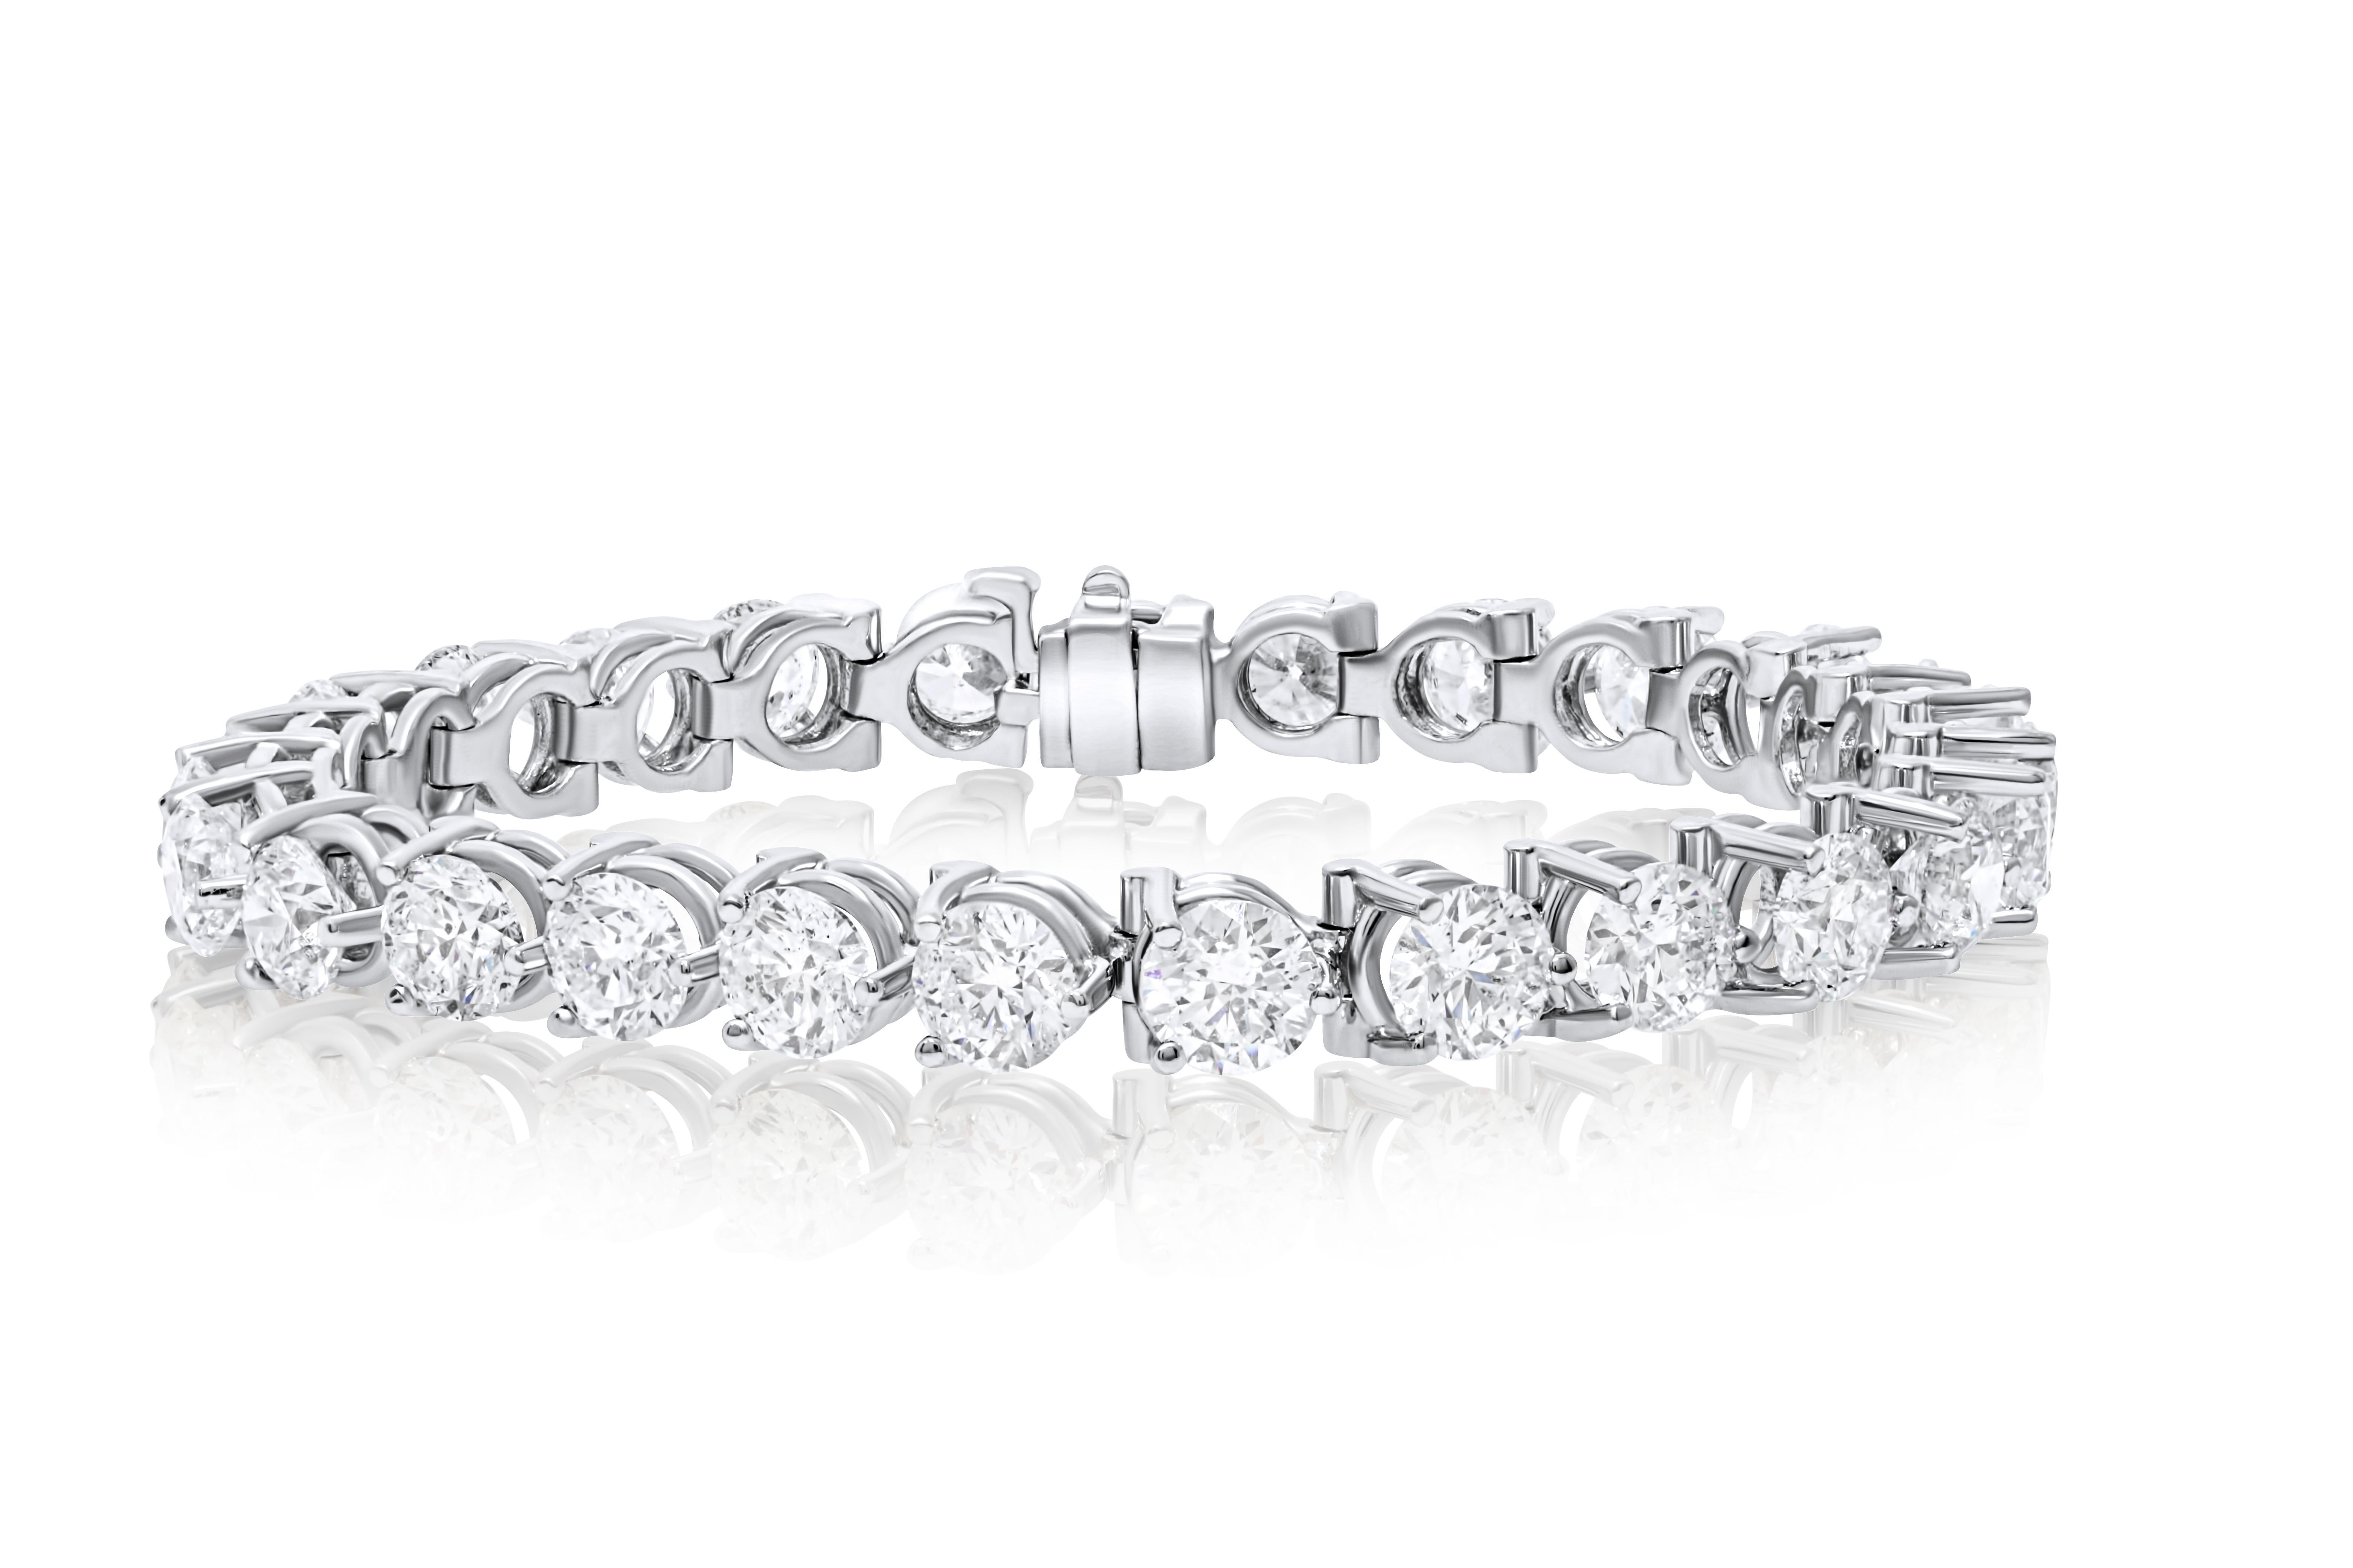 18 kt white gold 3 prong diamond tennis bracelet adorned with 5.60 cts tw of round diamonds
Diana M. is a leading supplier of top-quality fine jewelry for over 35 years.
Diana M is one-stop shop for all your jewelry shopping, carrying line of